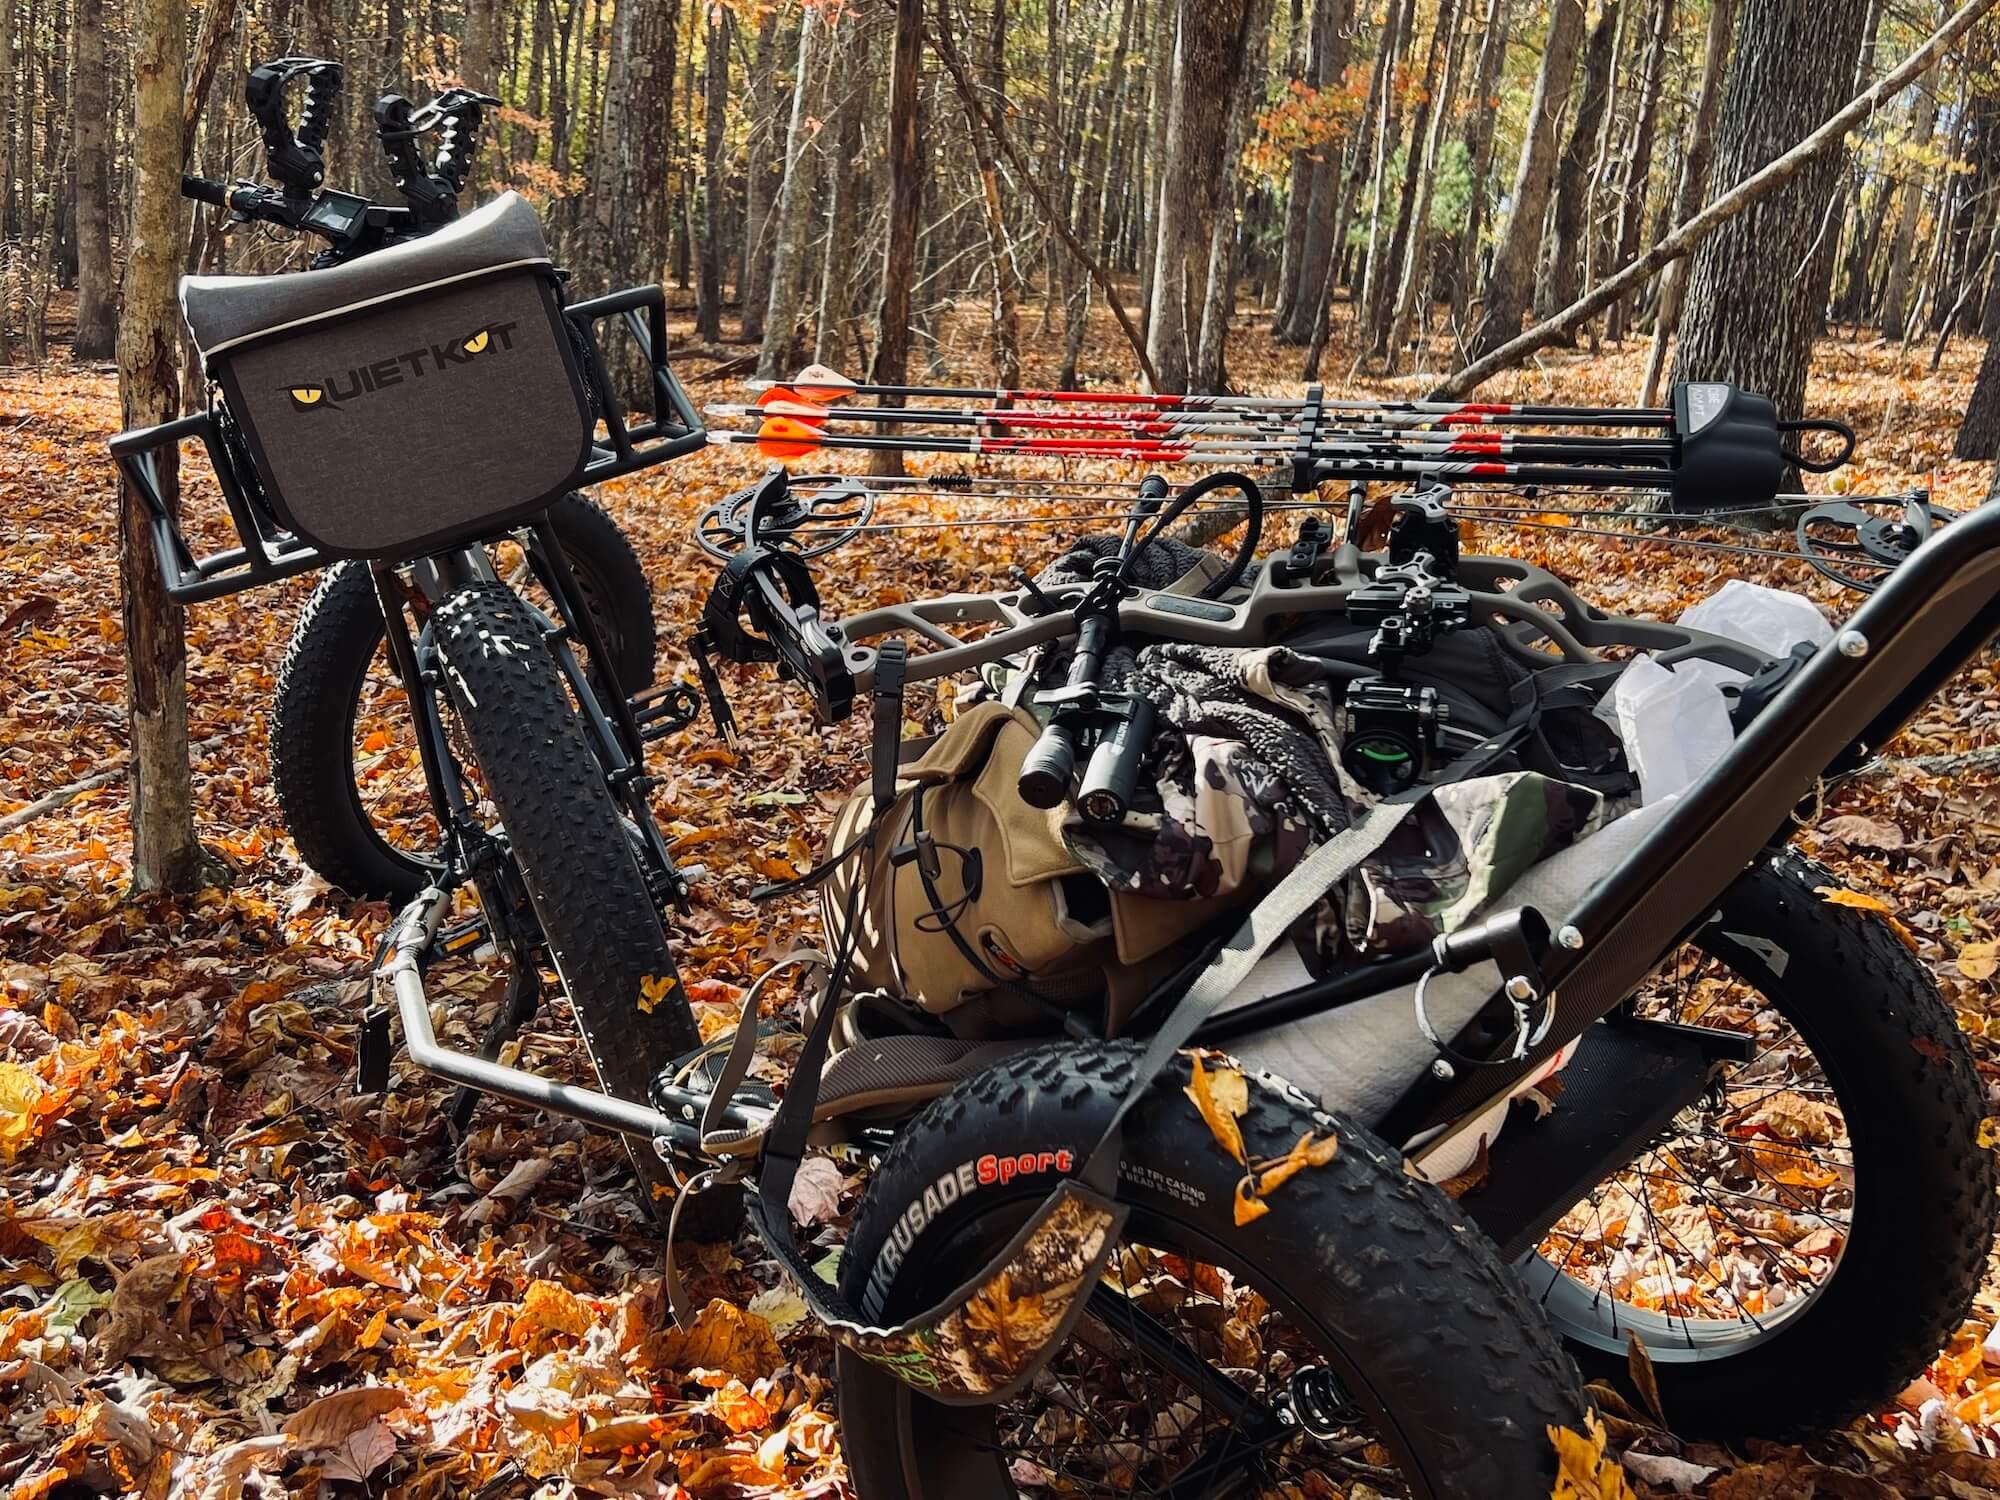 Heavy Weight Hauling | Leave no gear behind with the adjustability of the game trailer to fit your hauling needs.